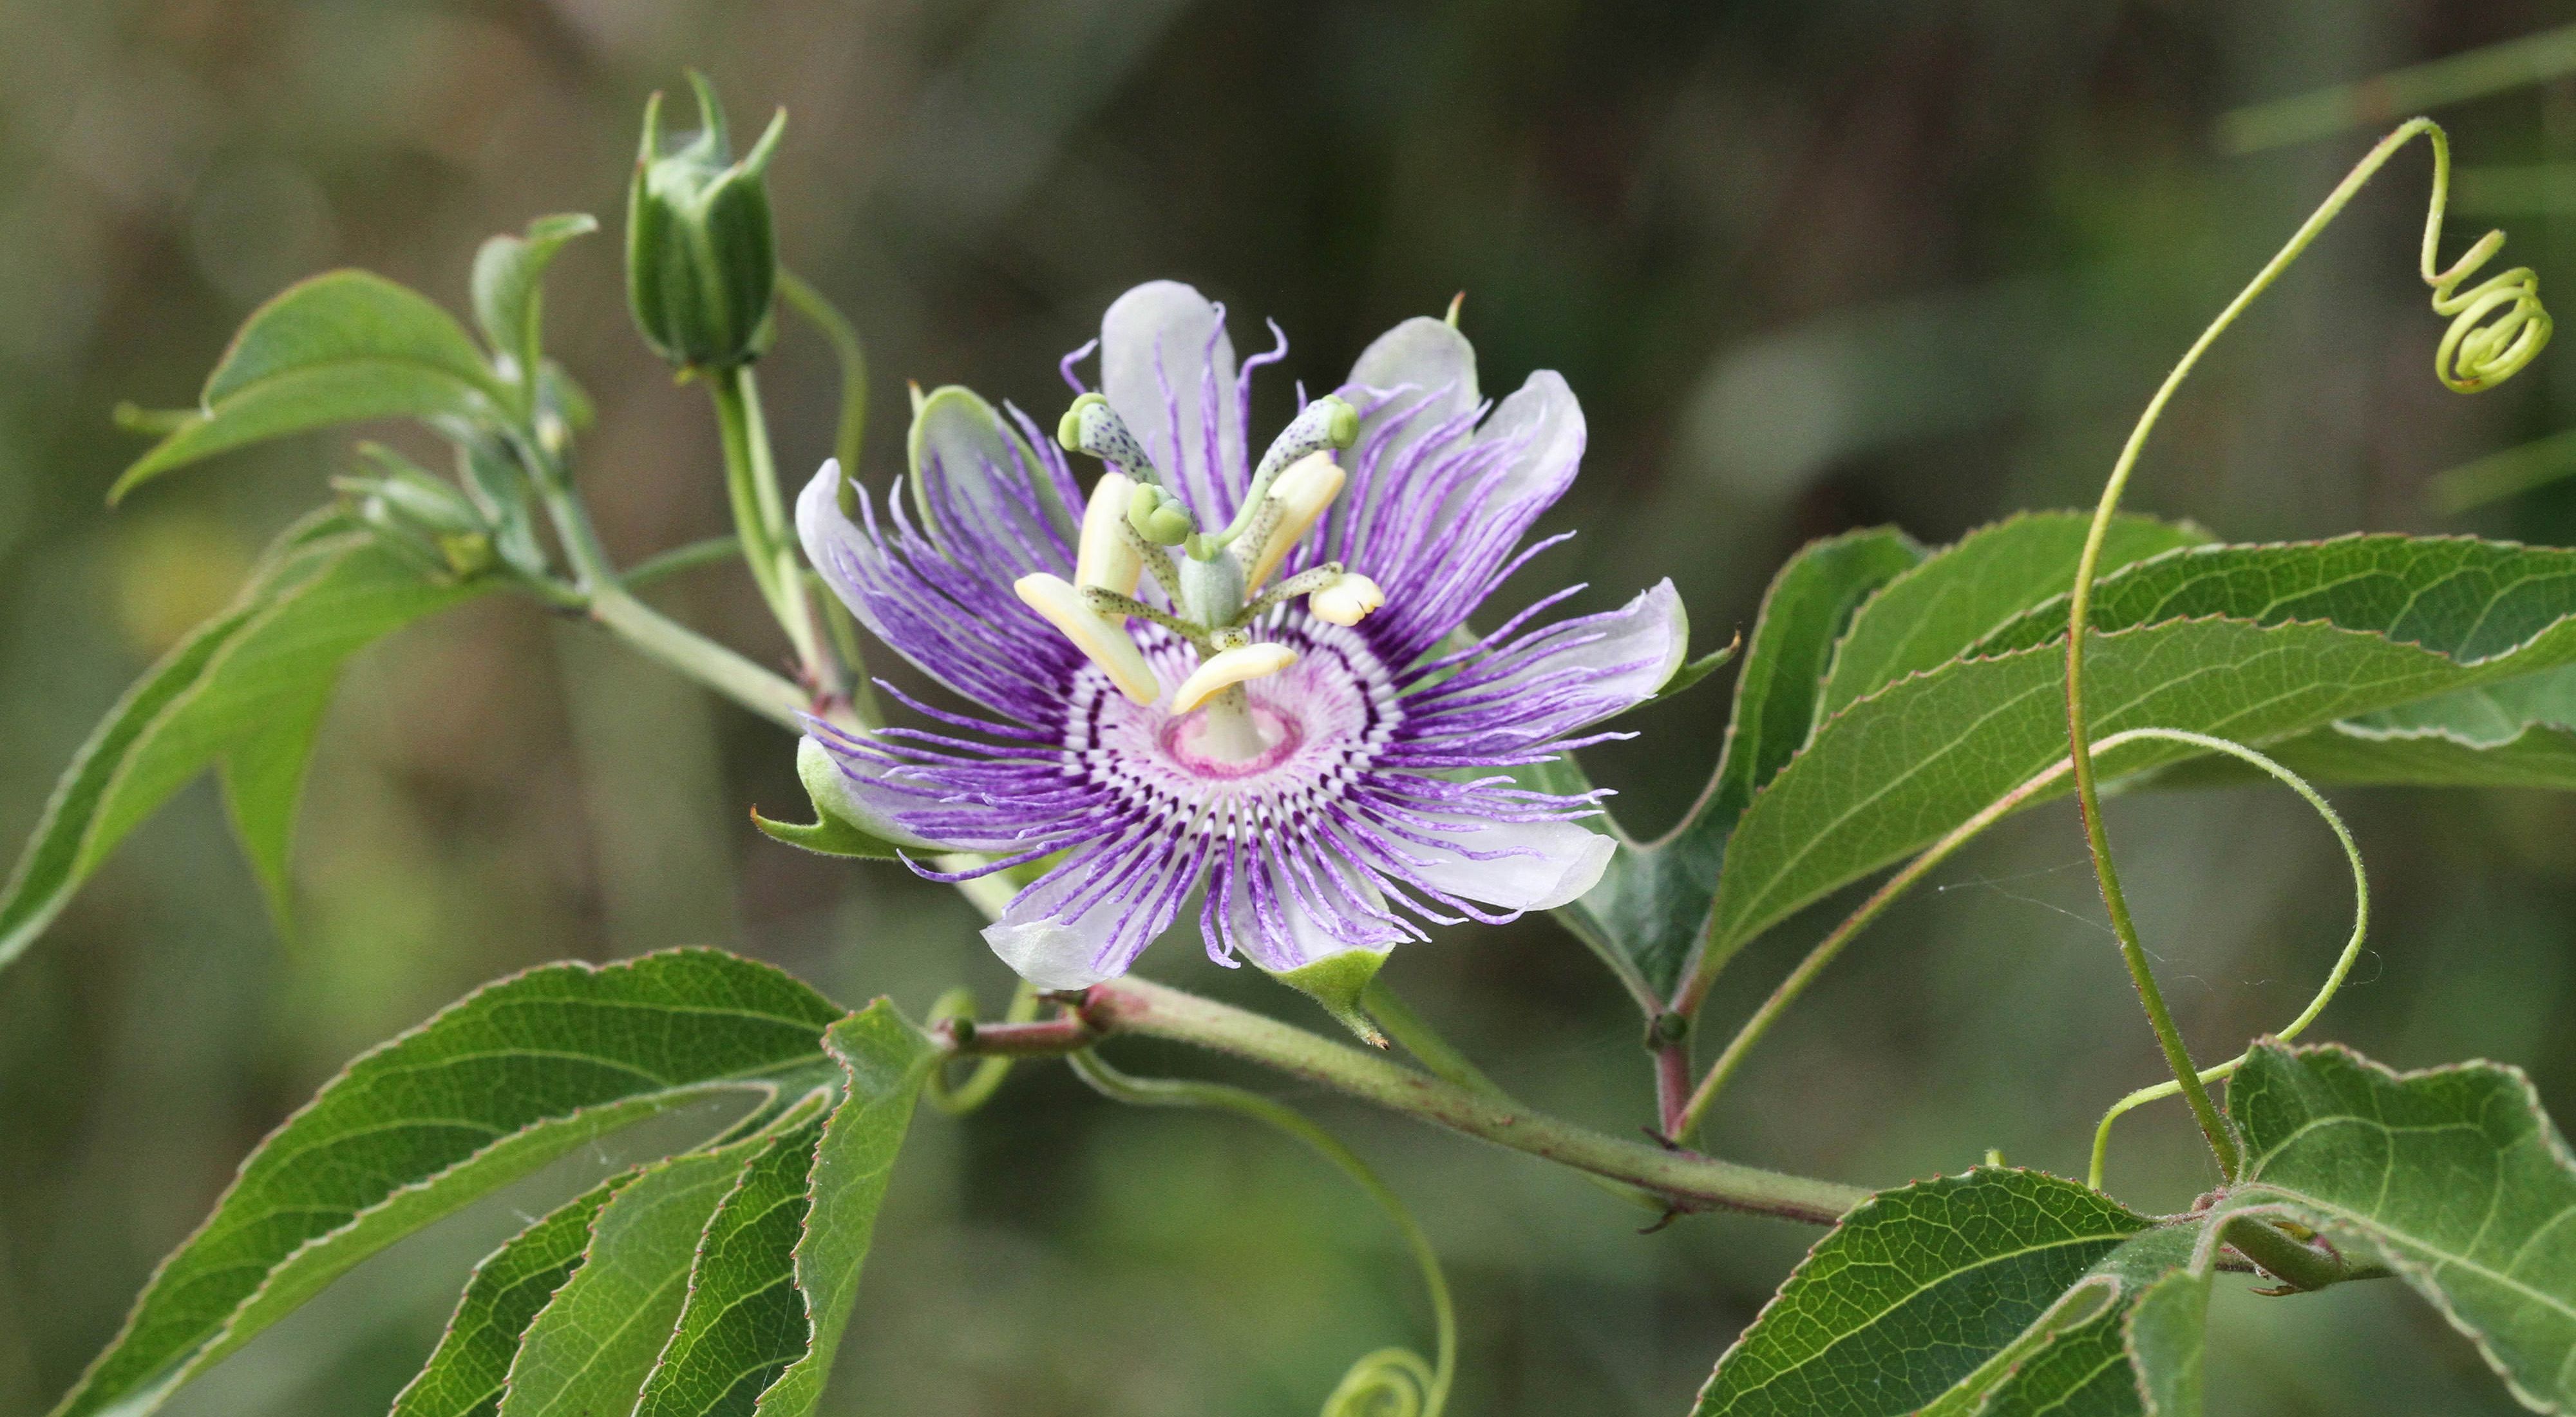 Native in the southeastern U.S. west to Oklahoma and Texas, passion vines attract hummingbirds, bees and butterflies.